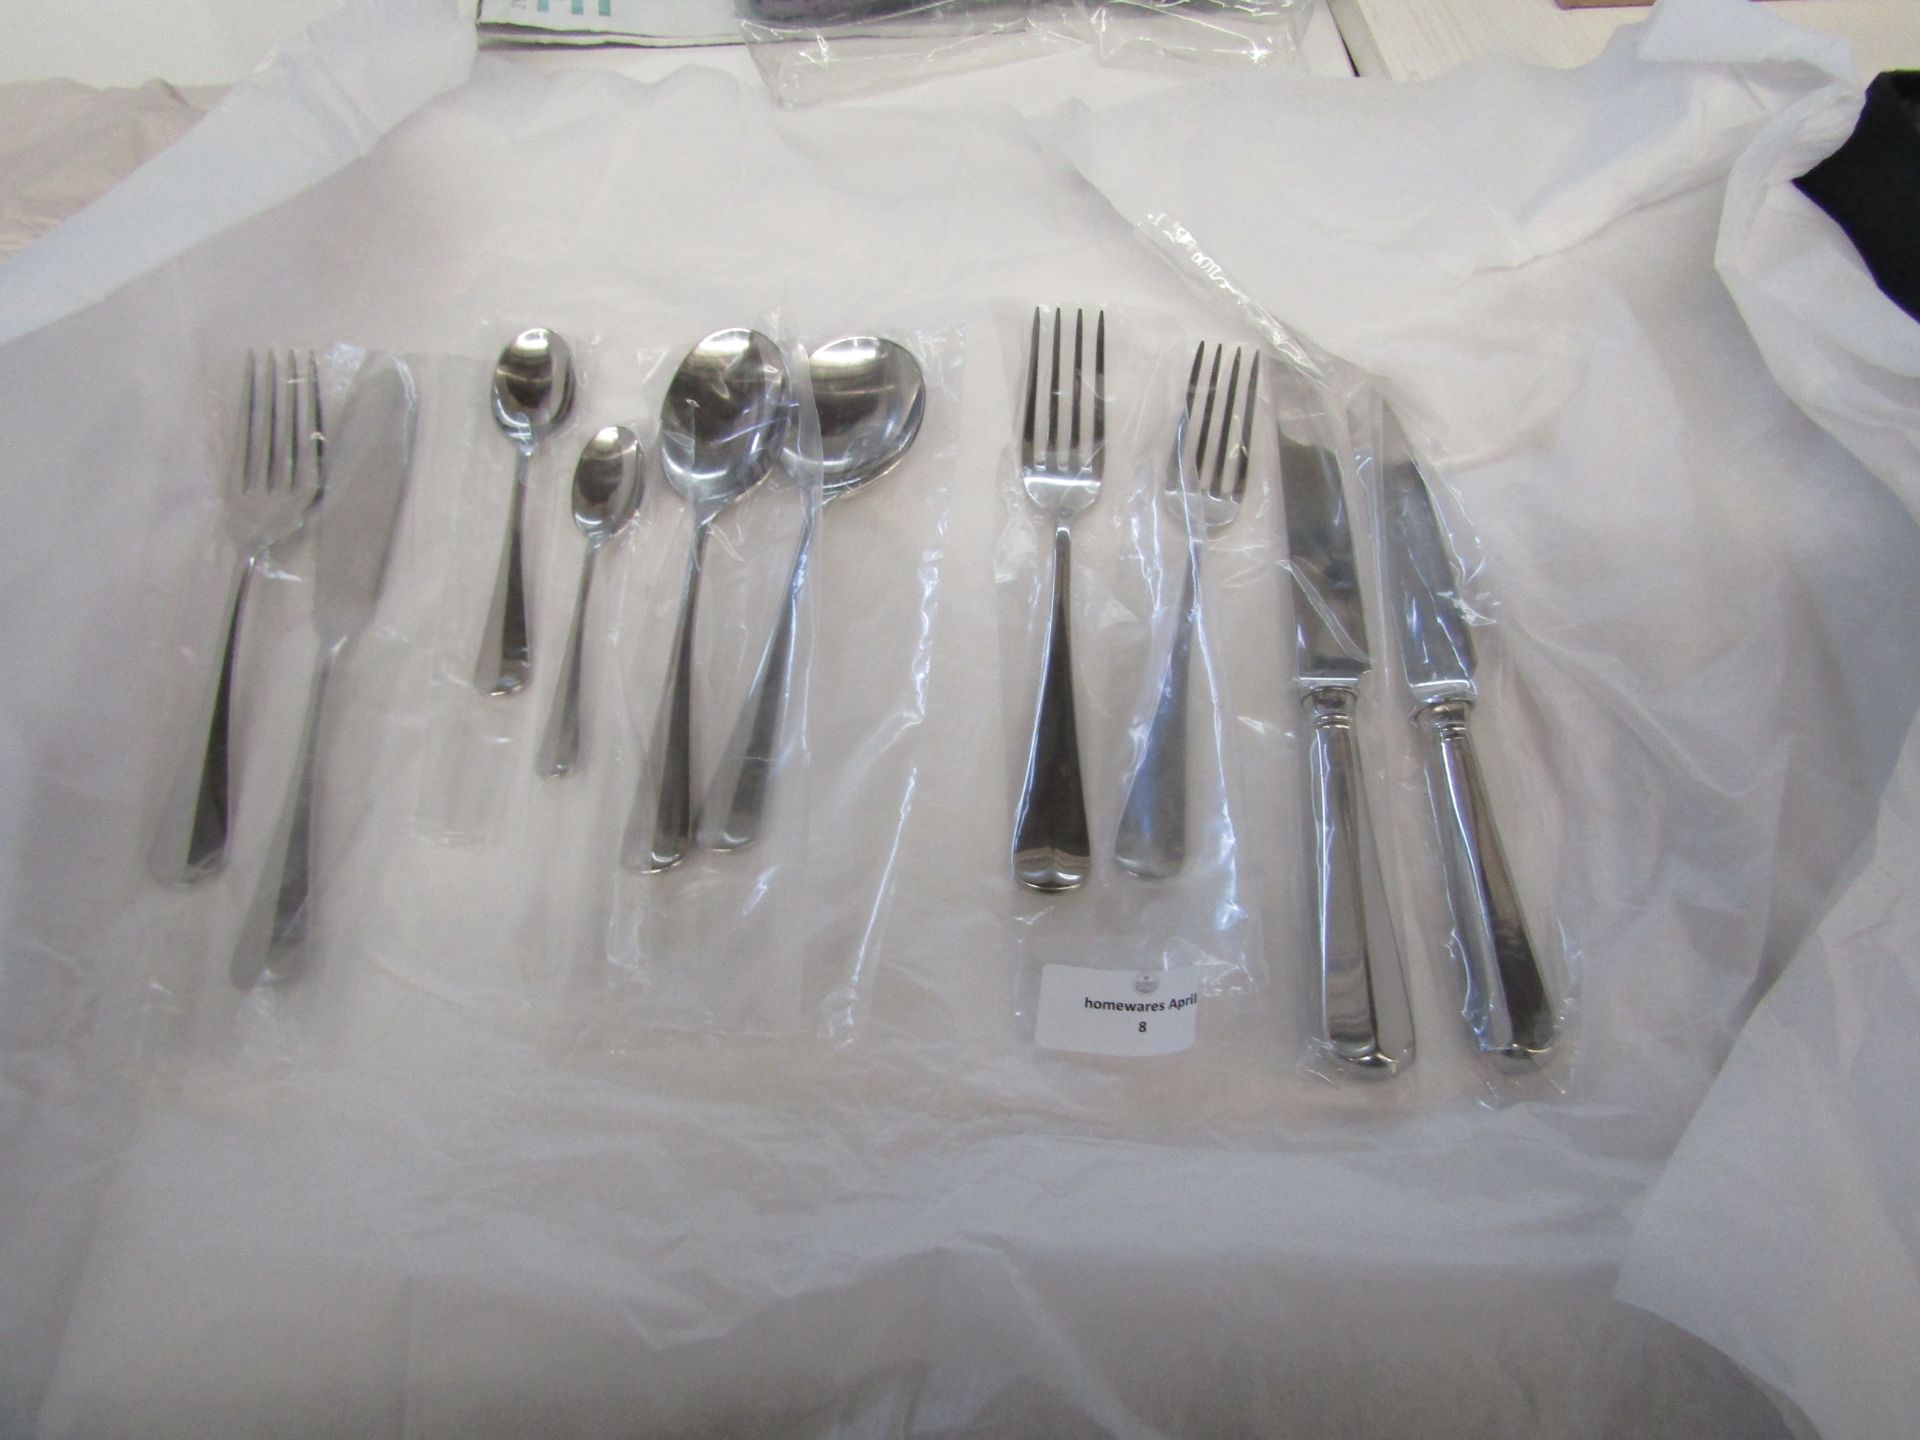 Carrs Silver Rattail Stainless Steel Cutlery Set 10 Piece 1 Person Setting RRP 240About the